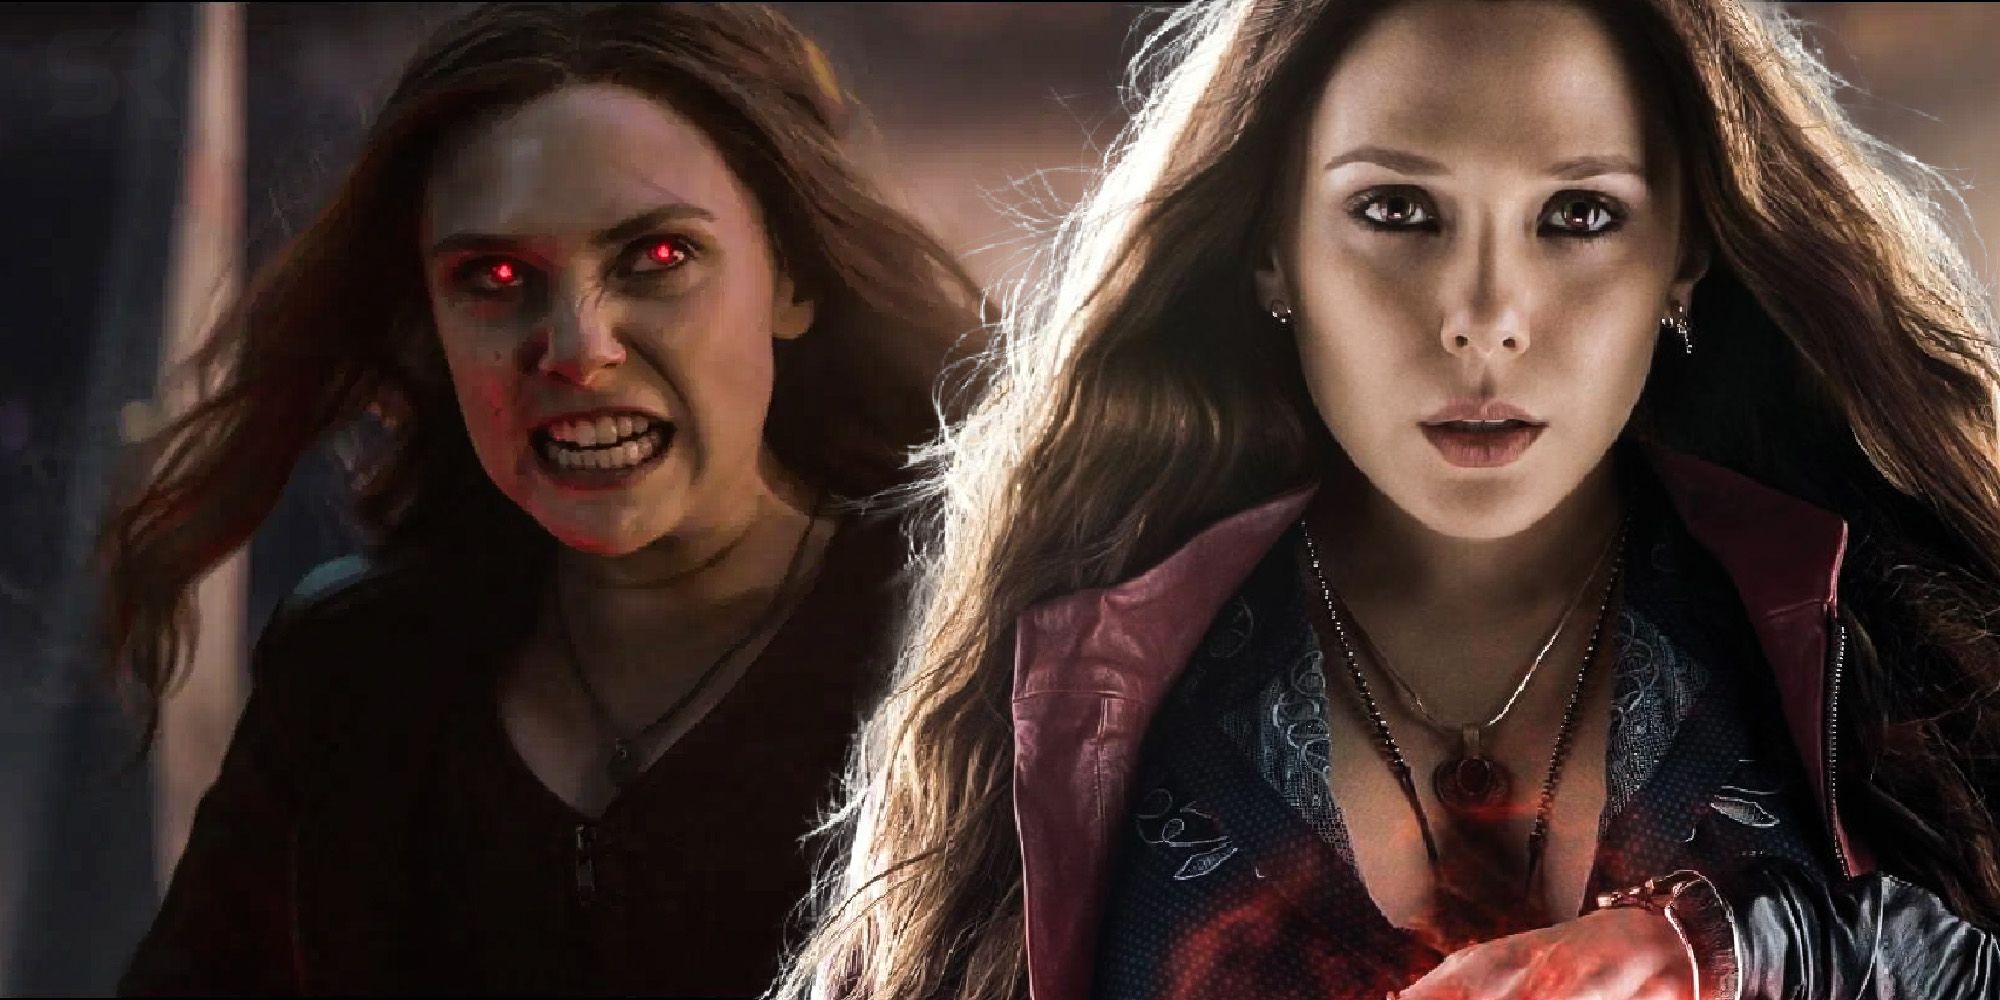 What are some feats of Wanda Maximoff (aka. 'Scarlet Witch') in